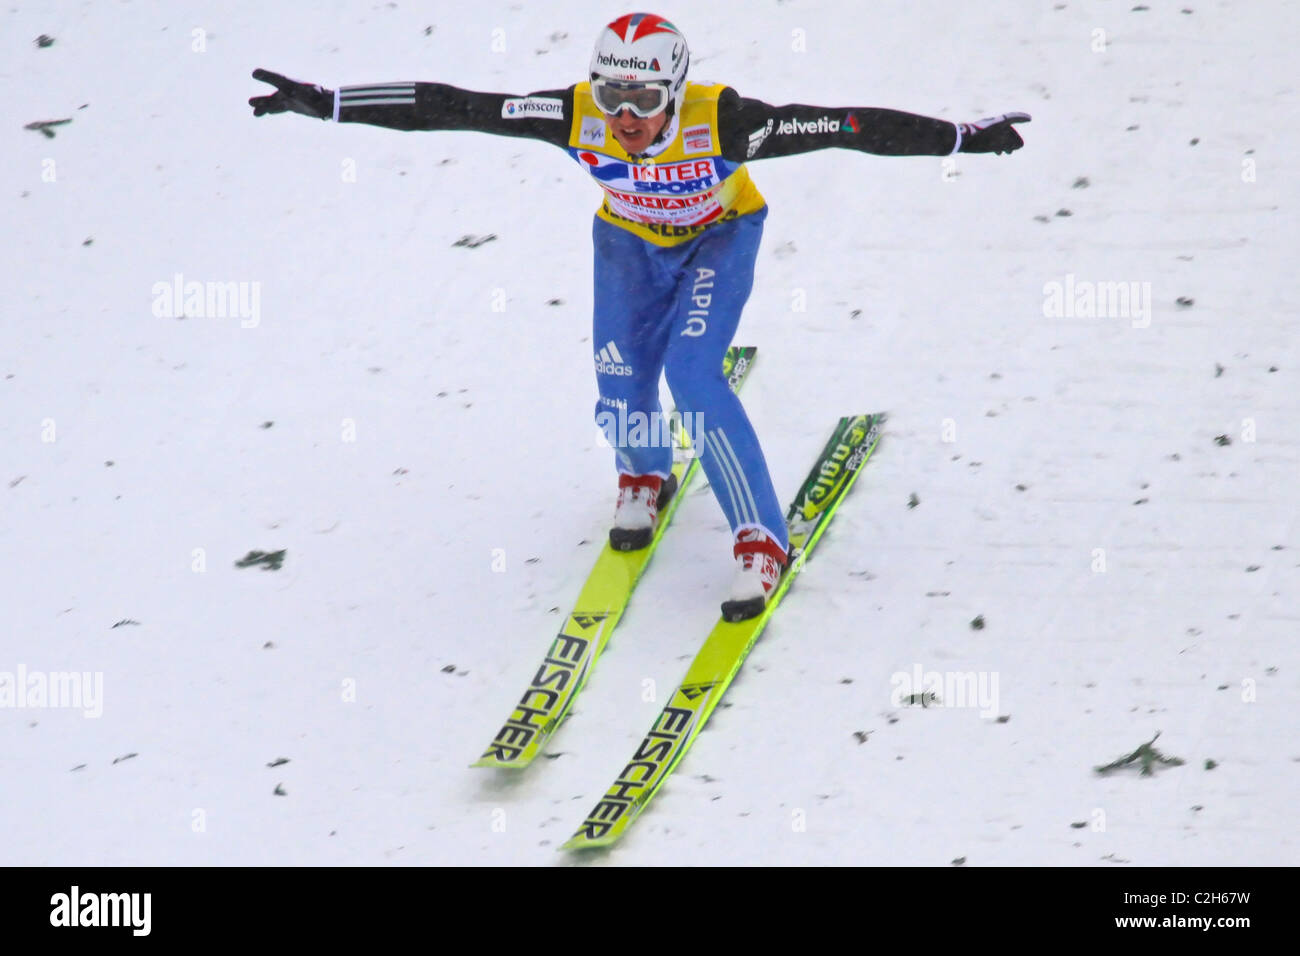 Ski jumper Simon Ammann lands safely at FIS World Cup December 19, 2009 in Engelberg SUI. He ended winning. Stock Photo